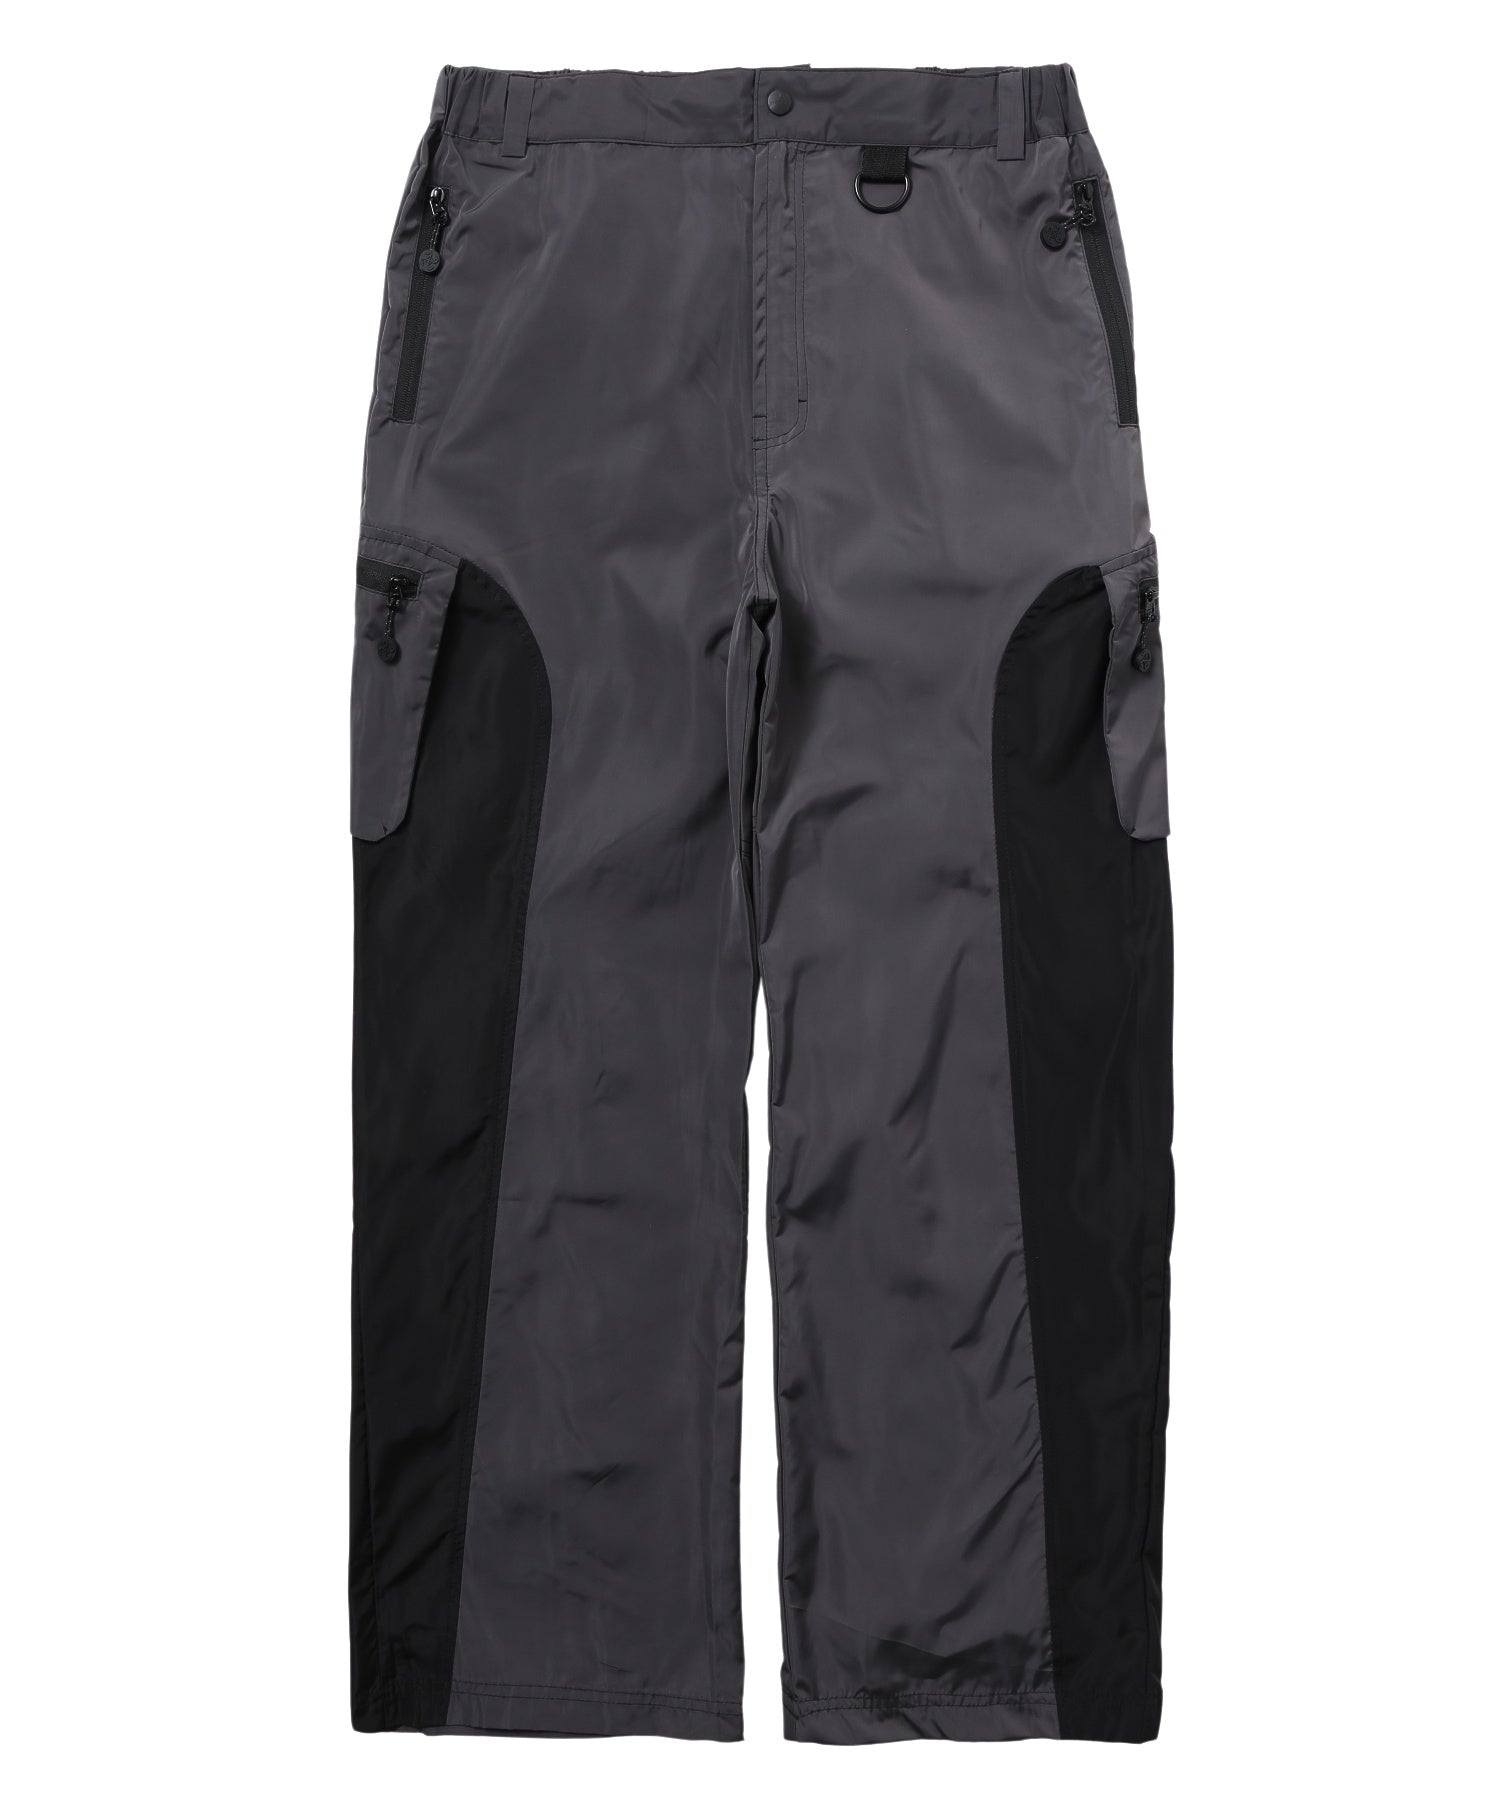 PARADAISE YOUTH CLUB/パラダイスユースクラブ/ARCH WIDE PANTS 5380404